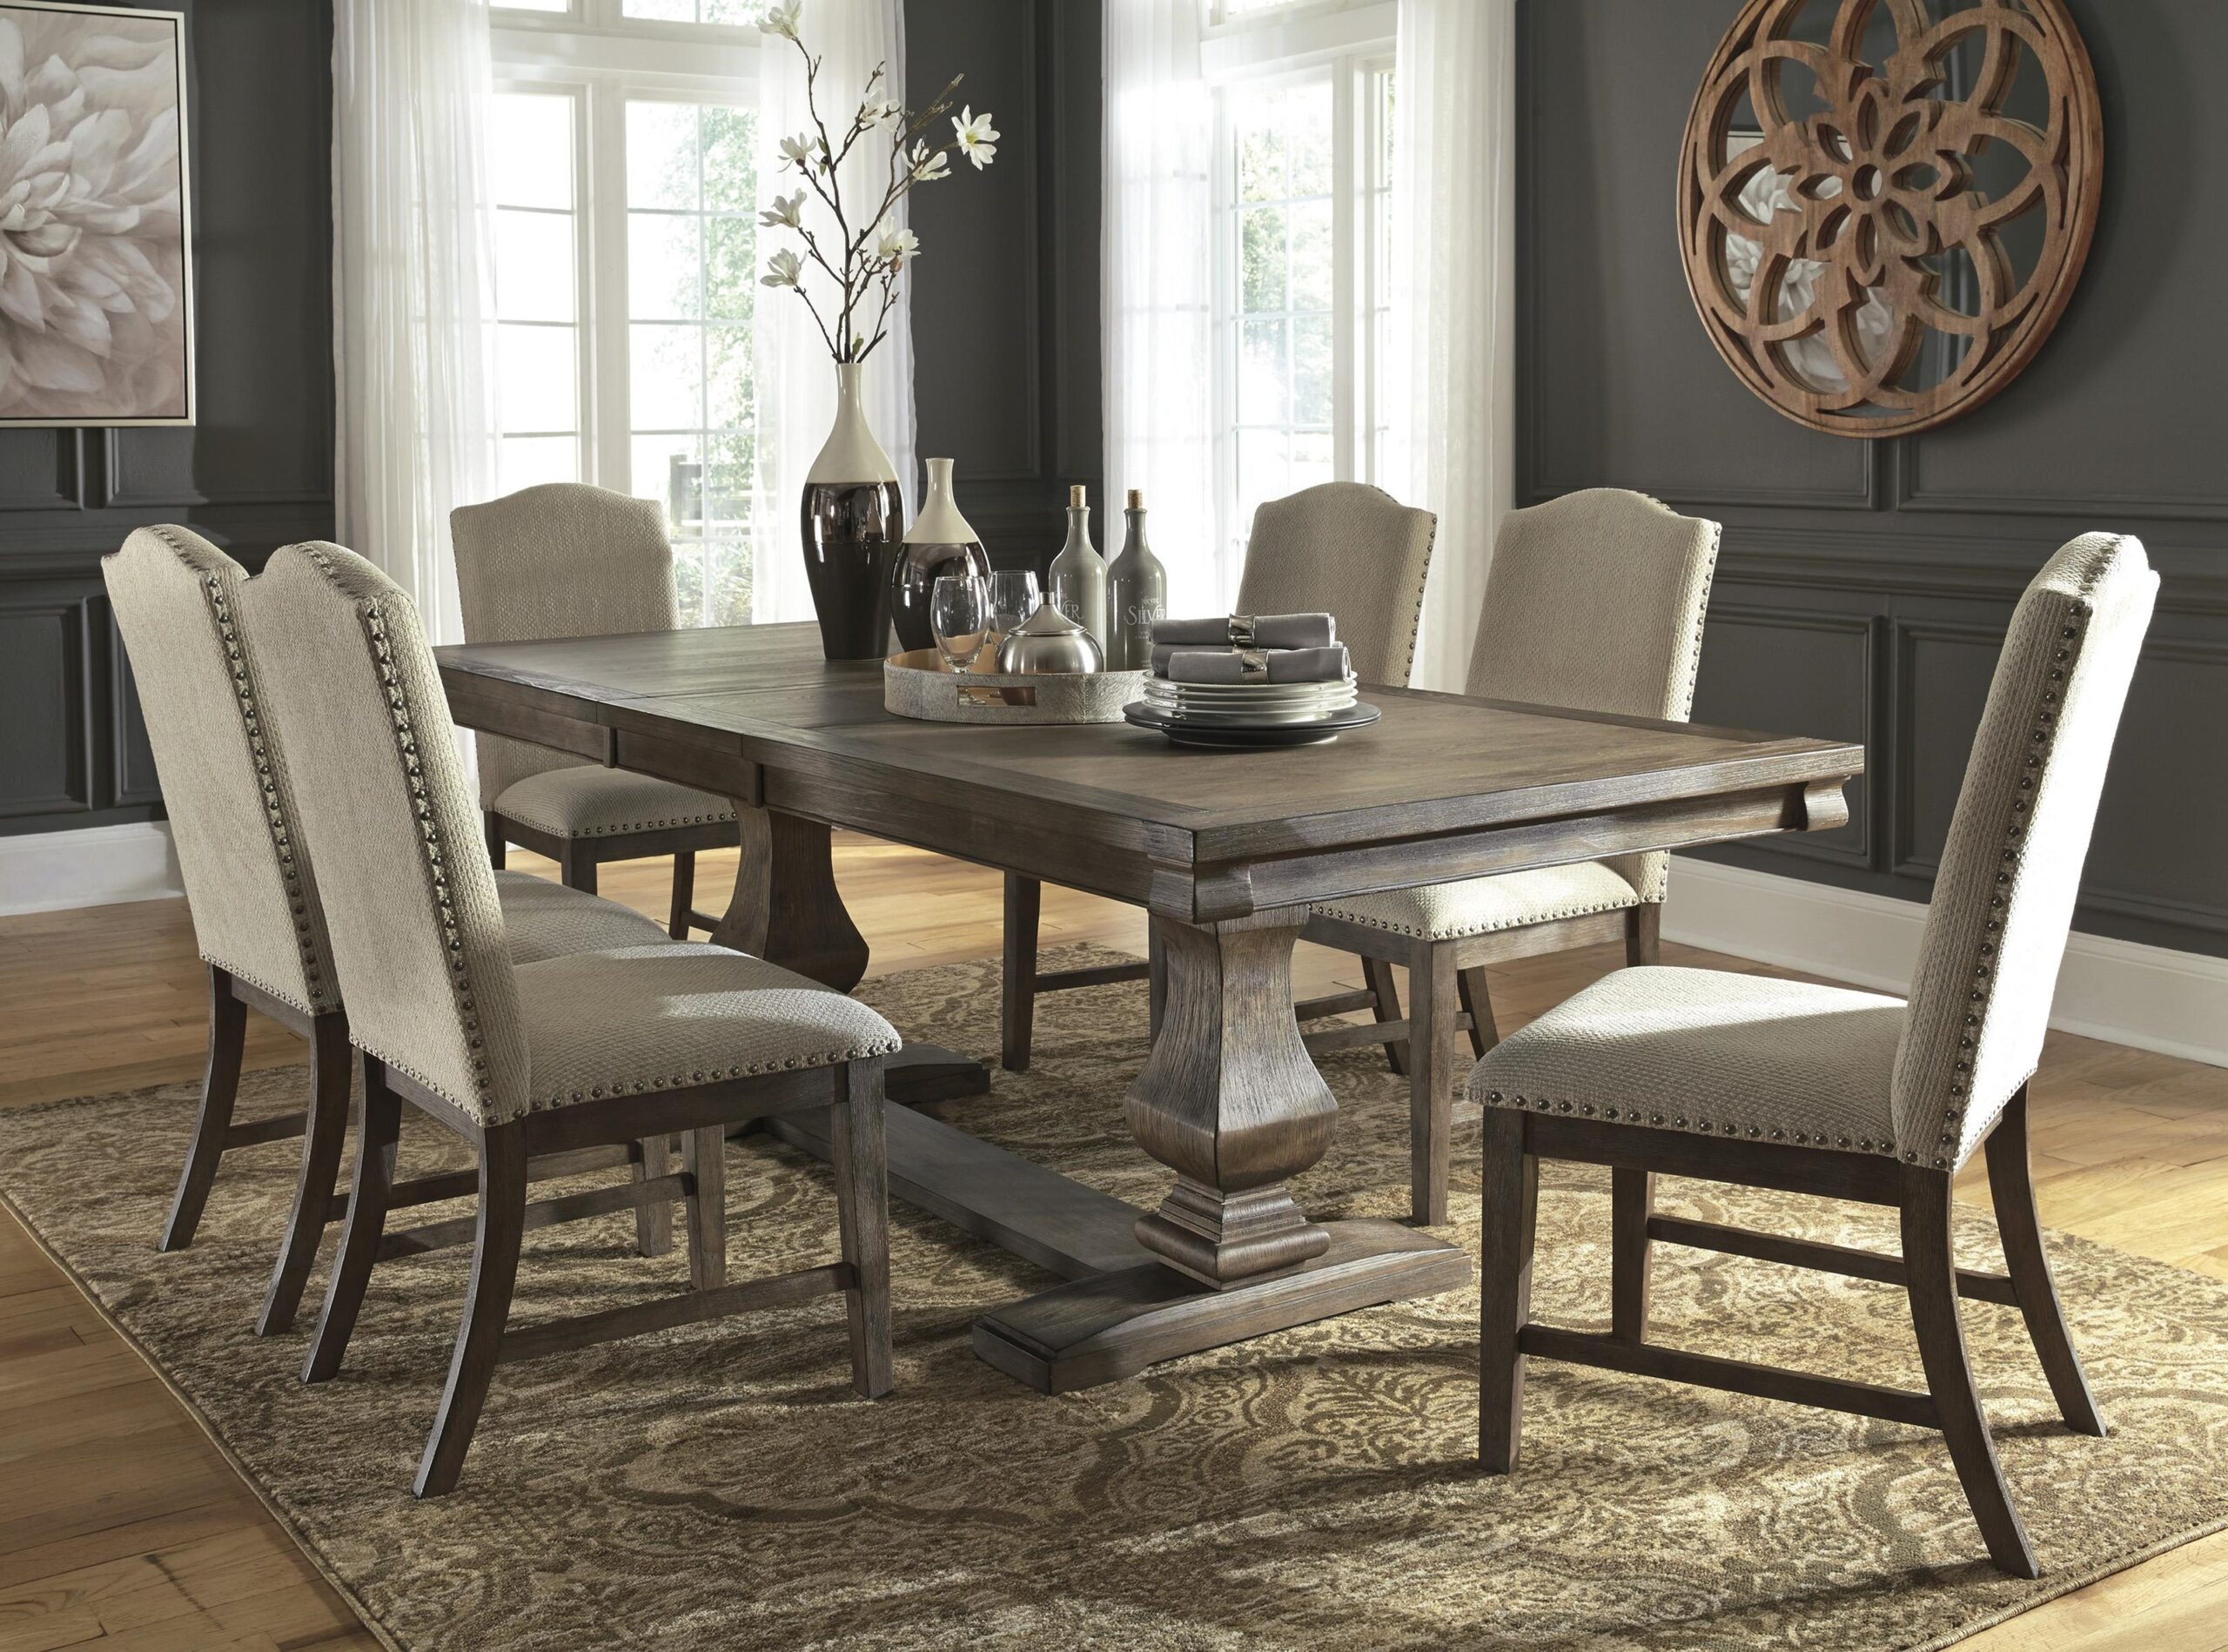 dining table chairs furniture johnelle sets gray d776 piece decor decoration dekorationcity bench 2021 pensacolavoice side stylish